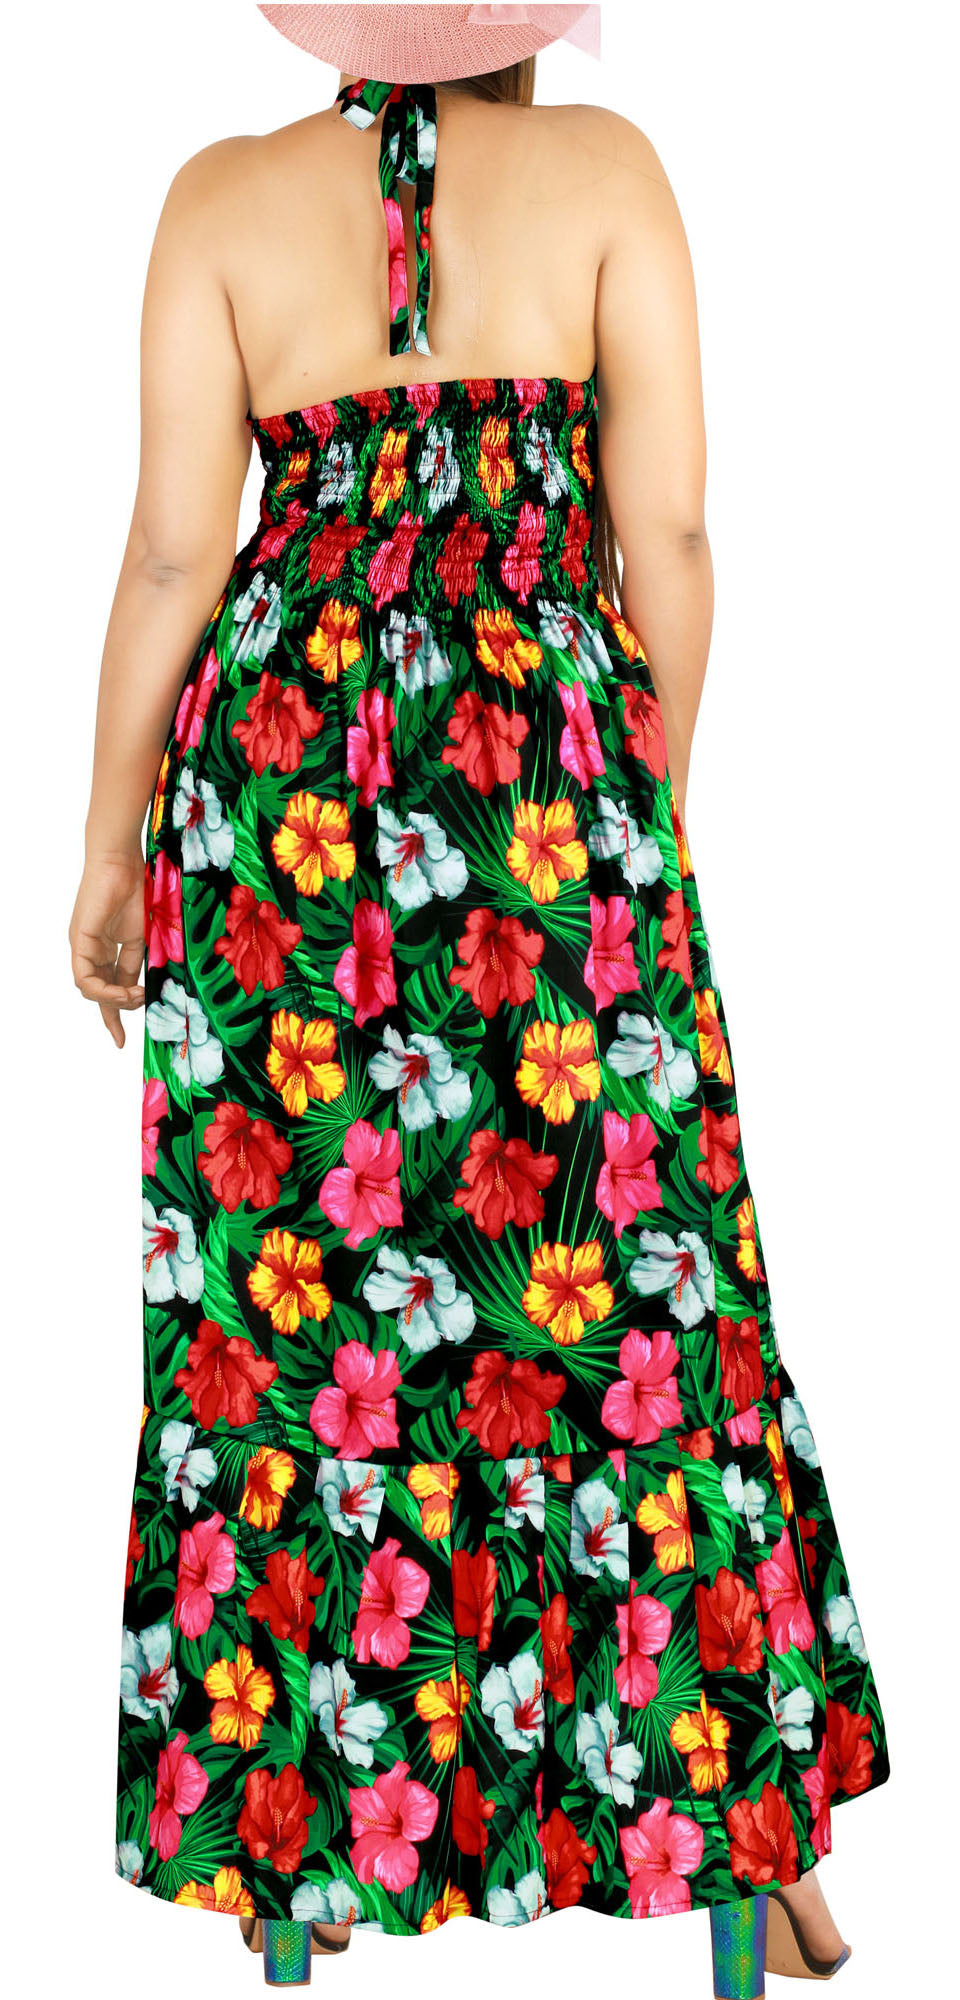 Hibiscus Low back Dream dress for women